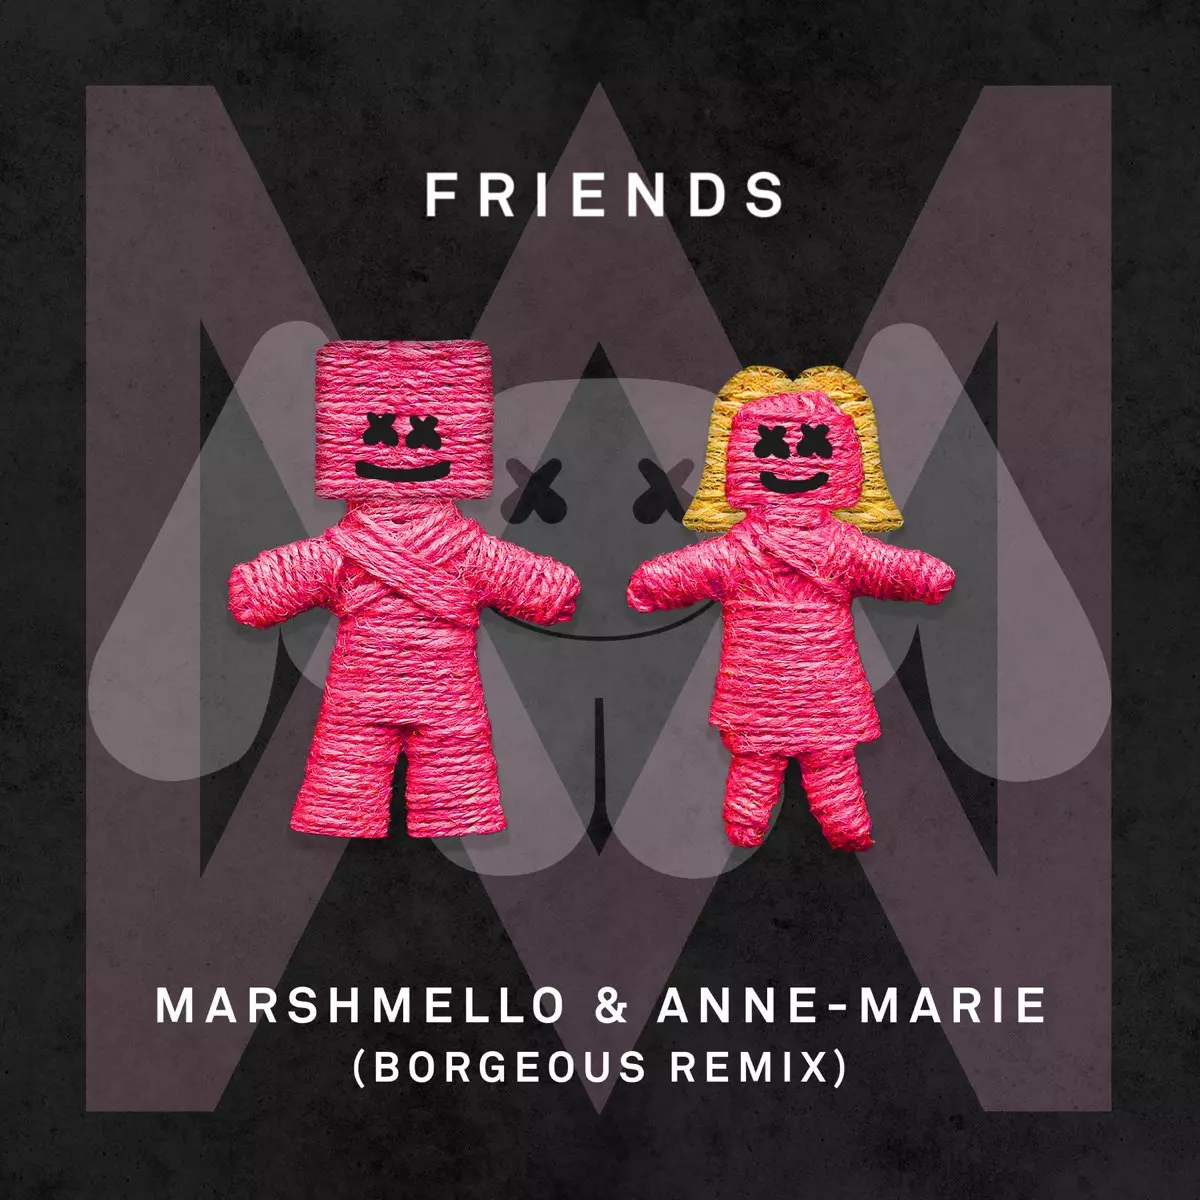 ‎FRIENDS (Borgeous Remix) - Single by Marshmello & Anne-Marie on Apple Music